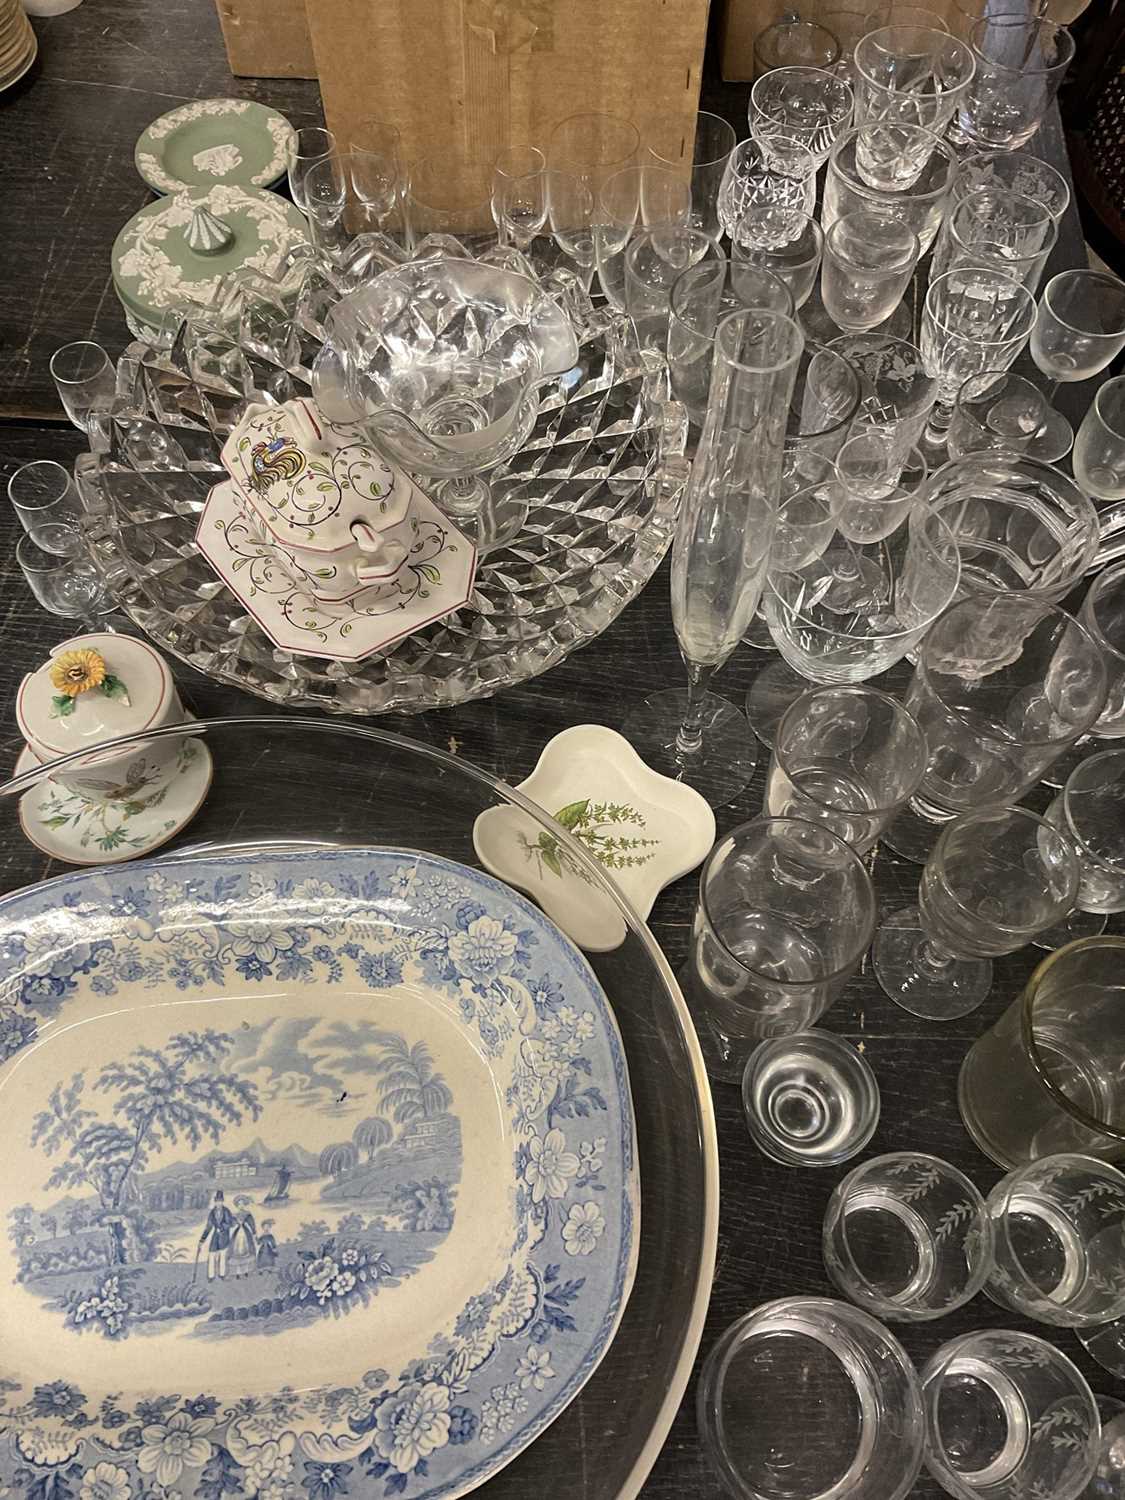 Lot 184 - Miscellaneous glassware, 19th century and later